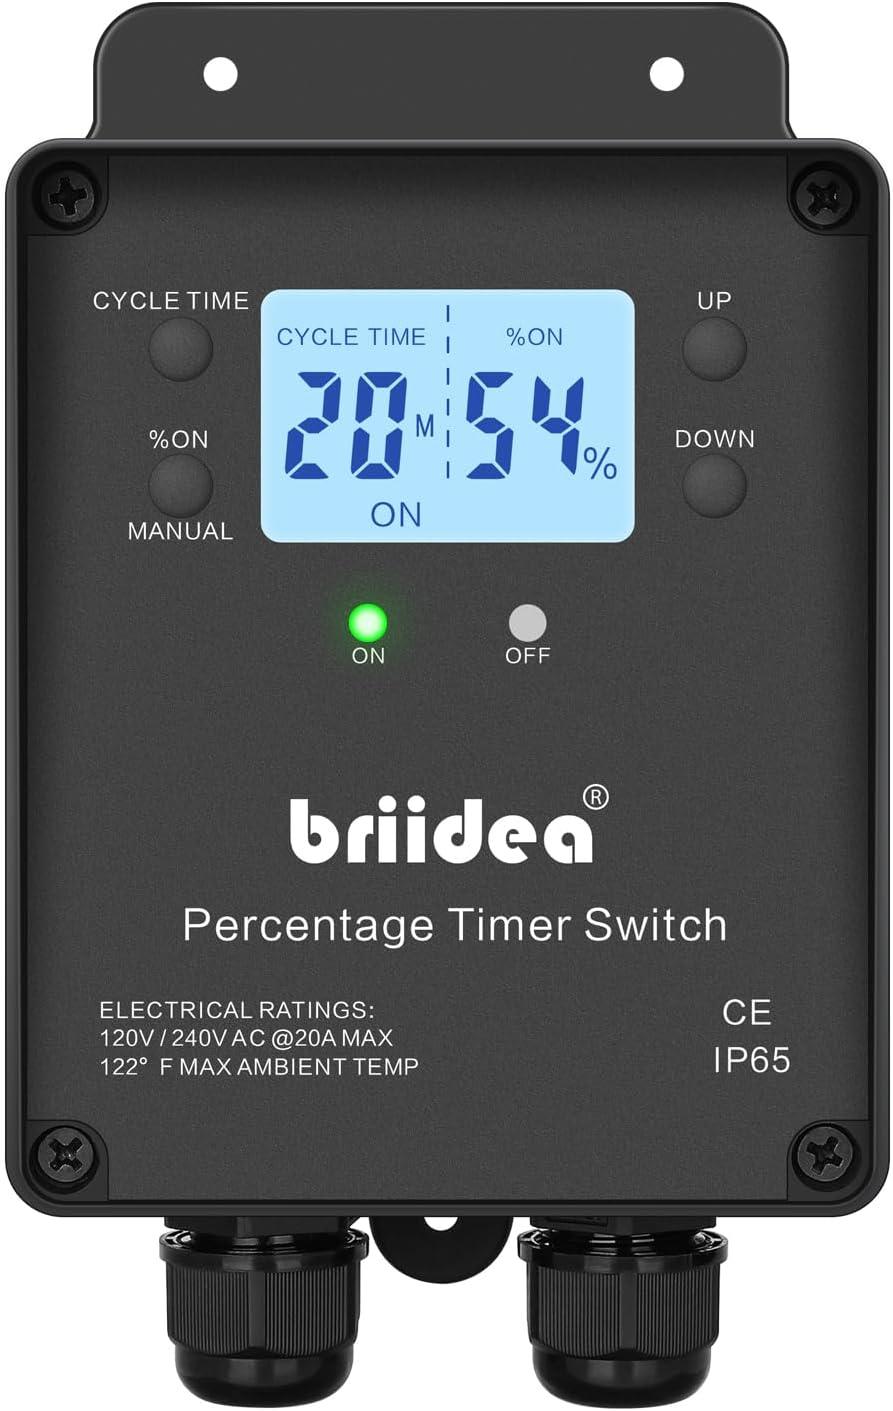 Briidea Percentage Timer Switch, Intelligent Digtal Display with White Backlighting, S/M/H Selectable Time Unit, Customizable Cycle Time Set Value, 20A Load /2 HP Motor, 120/240 VAC Input